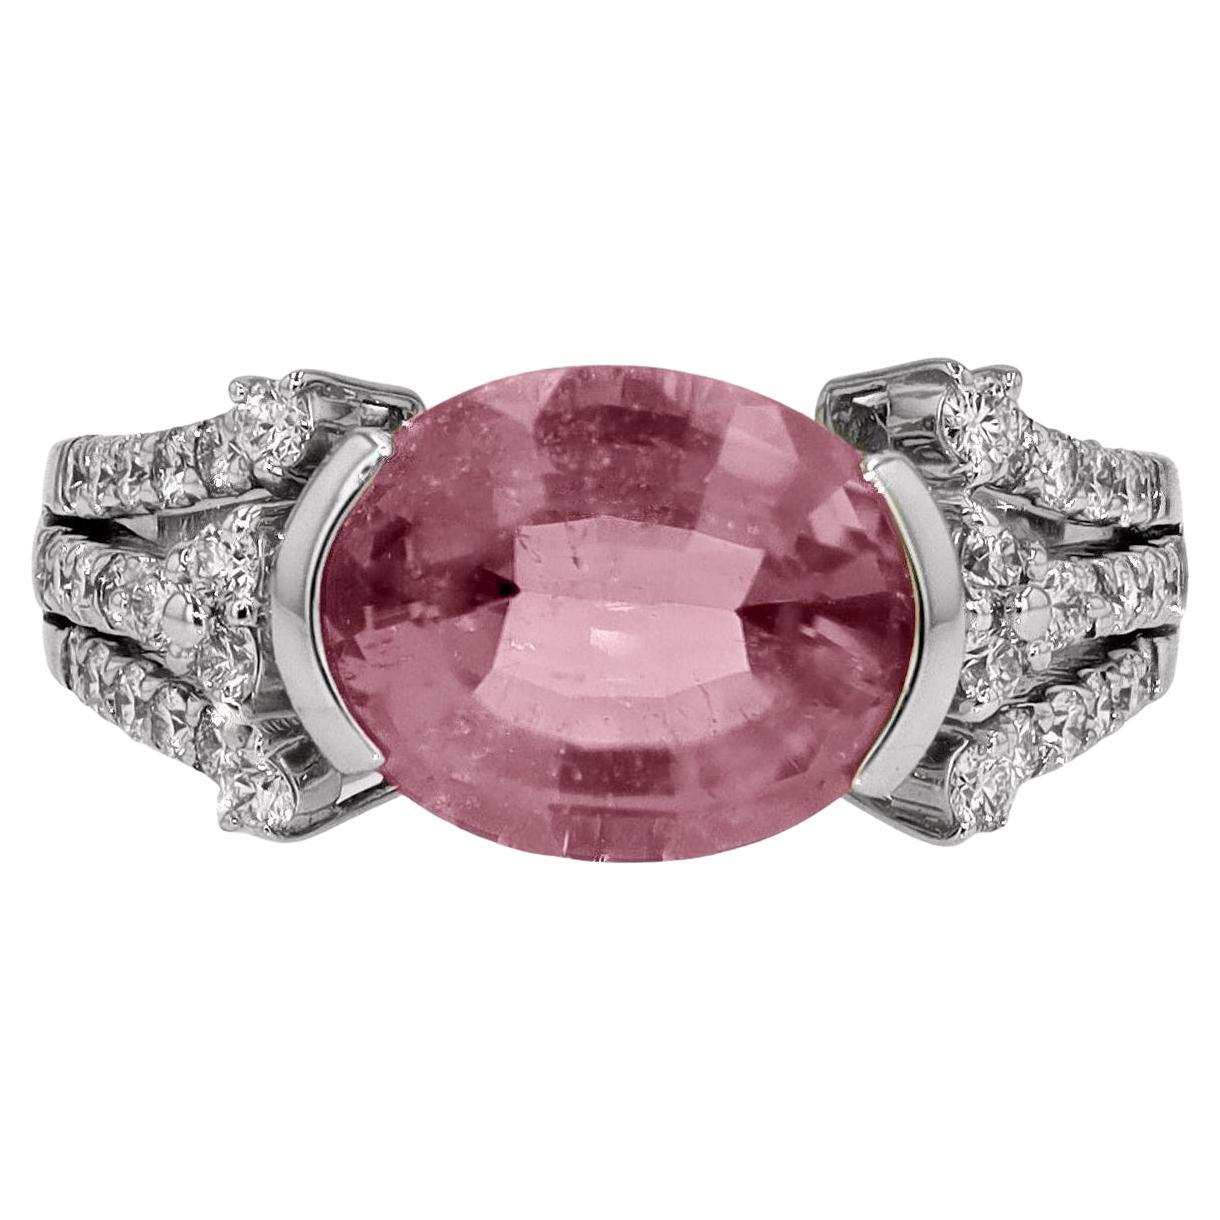 East West 6.90 Carat Pink Tourmaline and Diamond Ring For Sale